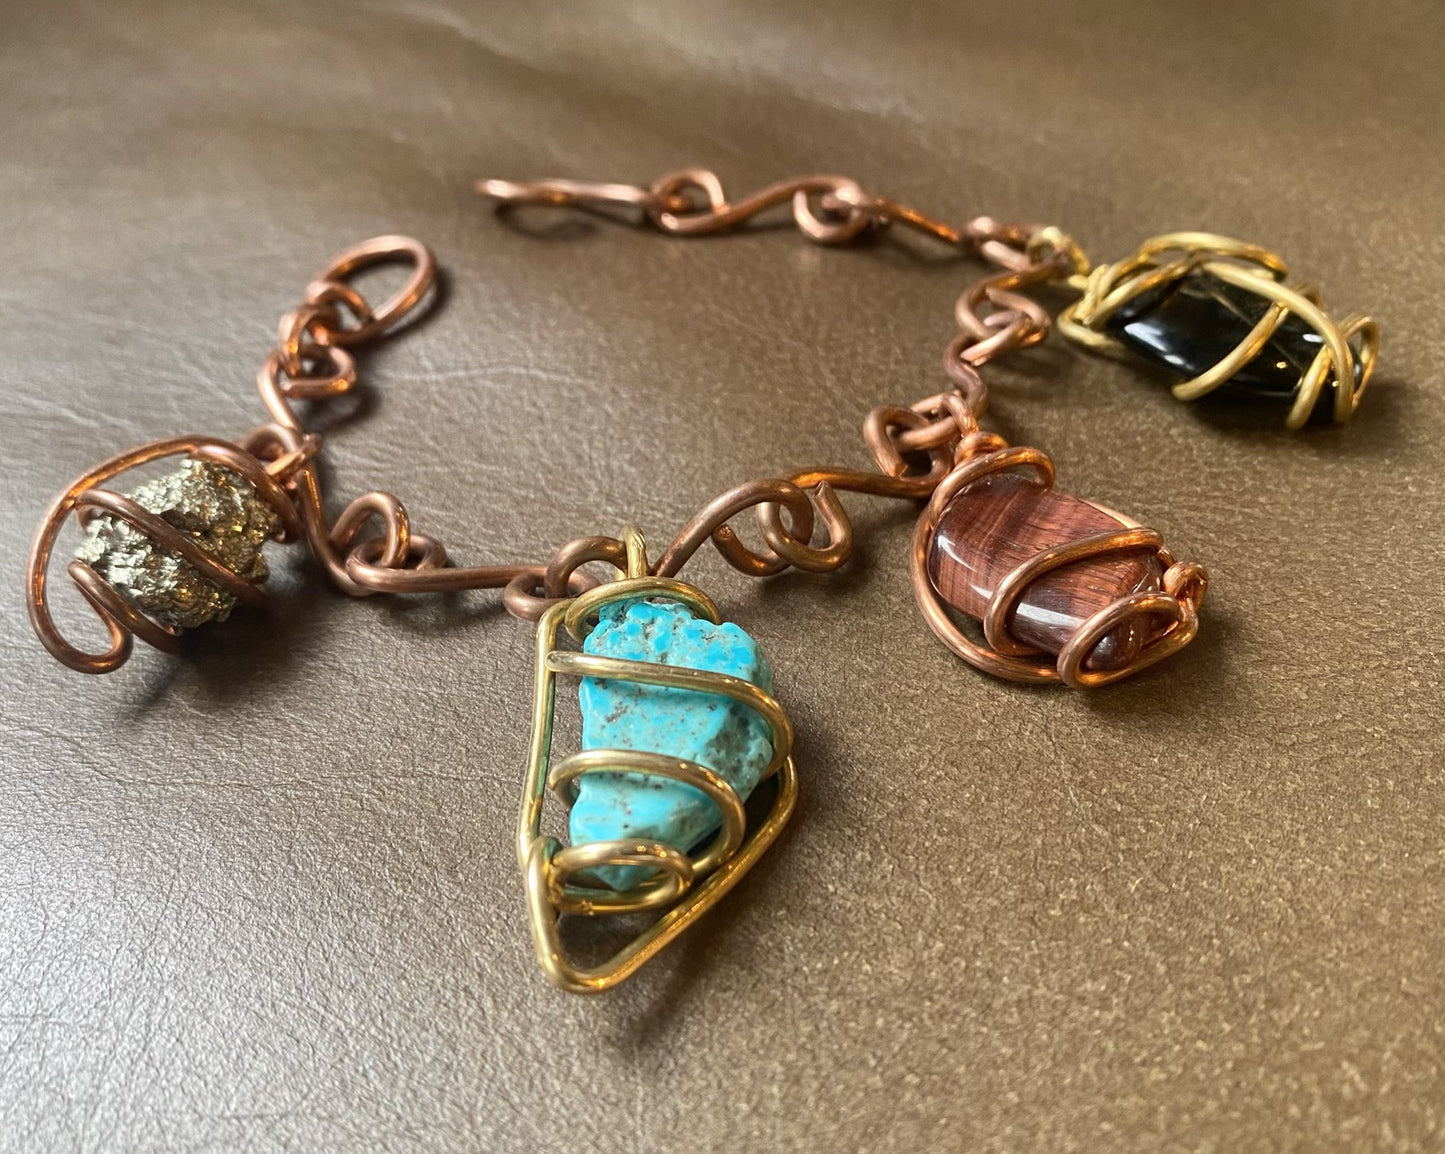 BRONZE+COPPER•TURQUOISE•RED TIGERS EYE•ONYX•PYRITE CHARM BRACELET